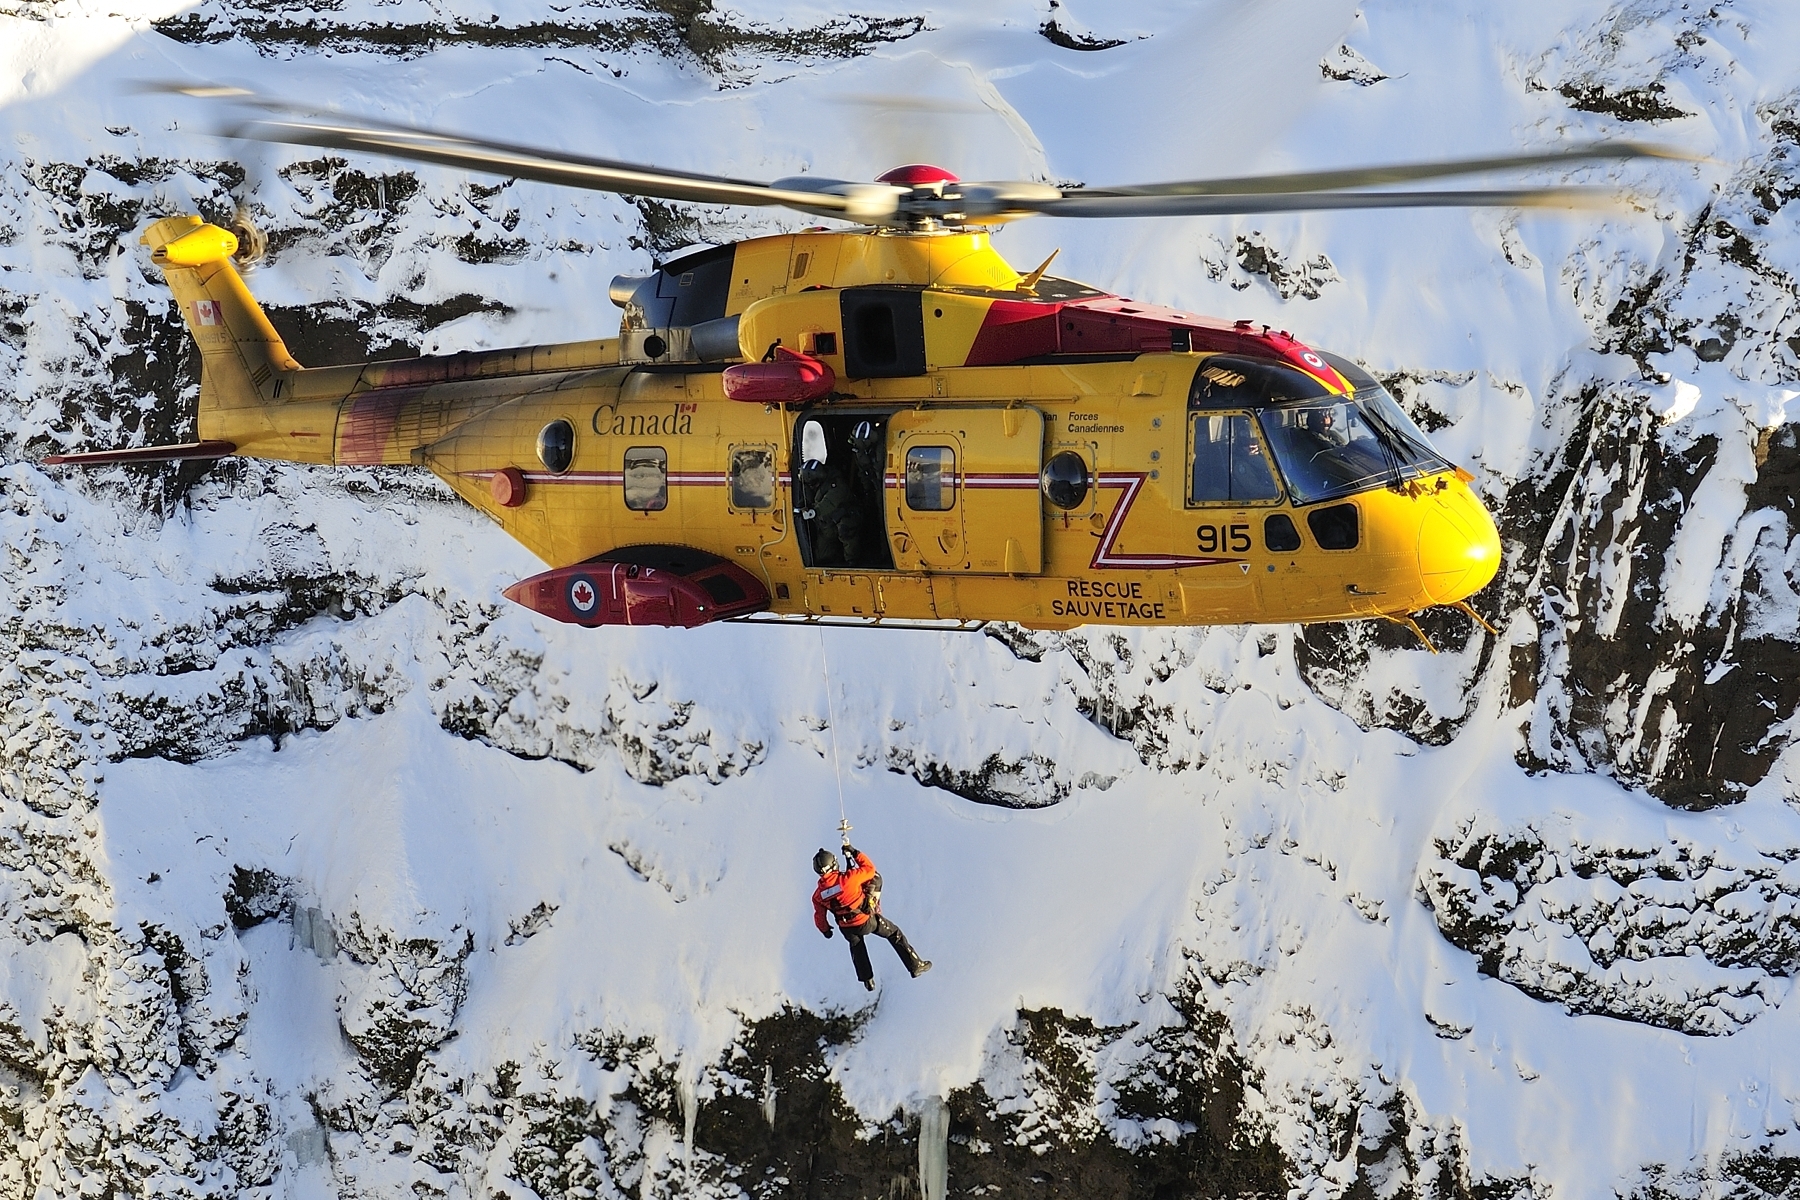 Sergeant Kevin O'Donnell, a search and rescue technician from 103 Search and Rescue Squadron, based in Gander, Newfoundland and Labrador, is hoisted down from a CH-149 Cormorant helicopter to participate in a mountain rescue scenario during a search and rescue exercise held in Iceland on February 10, 2016. PHOTO: Master Corporal Johanie Maheu